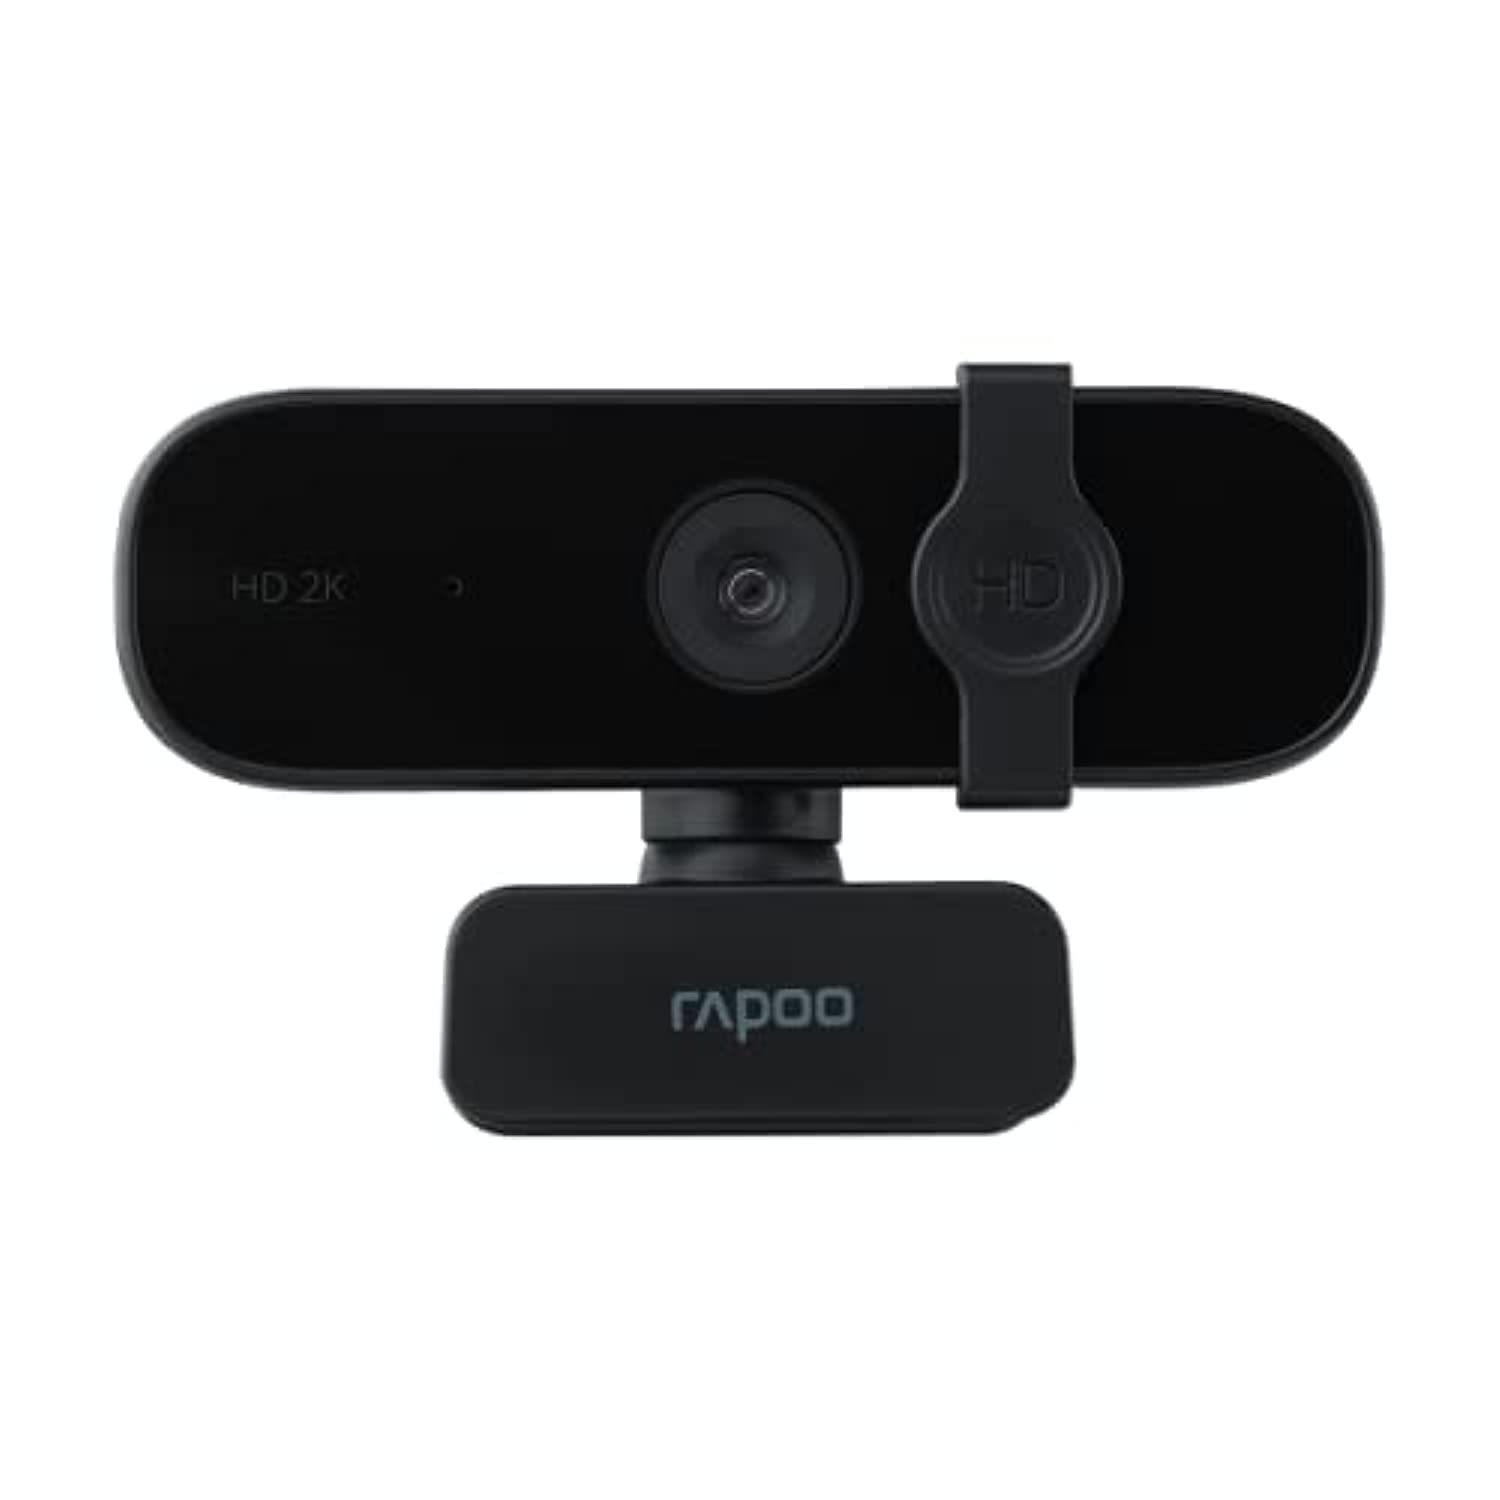 Rapoo C280 Digital USB FHD 1440P Business Webcam with Dual Microphone & Privacy Cover, Plug and Play, for Zoom/Skype/Google Hangouts/Face Time for Mac, Laptop MAC PC Desktop